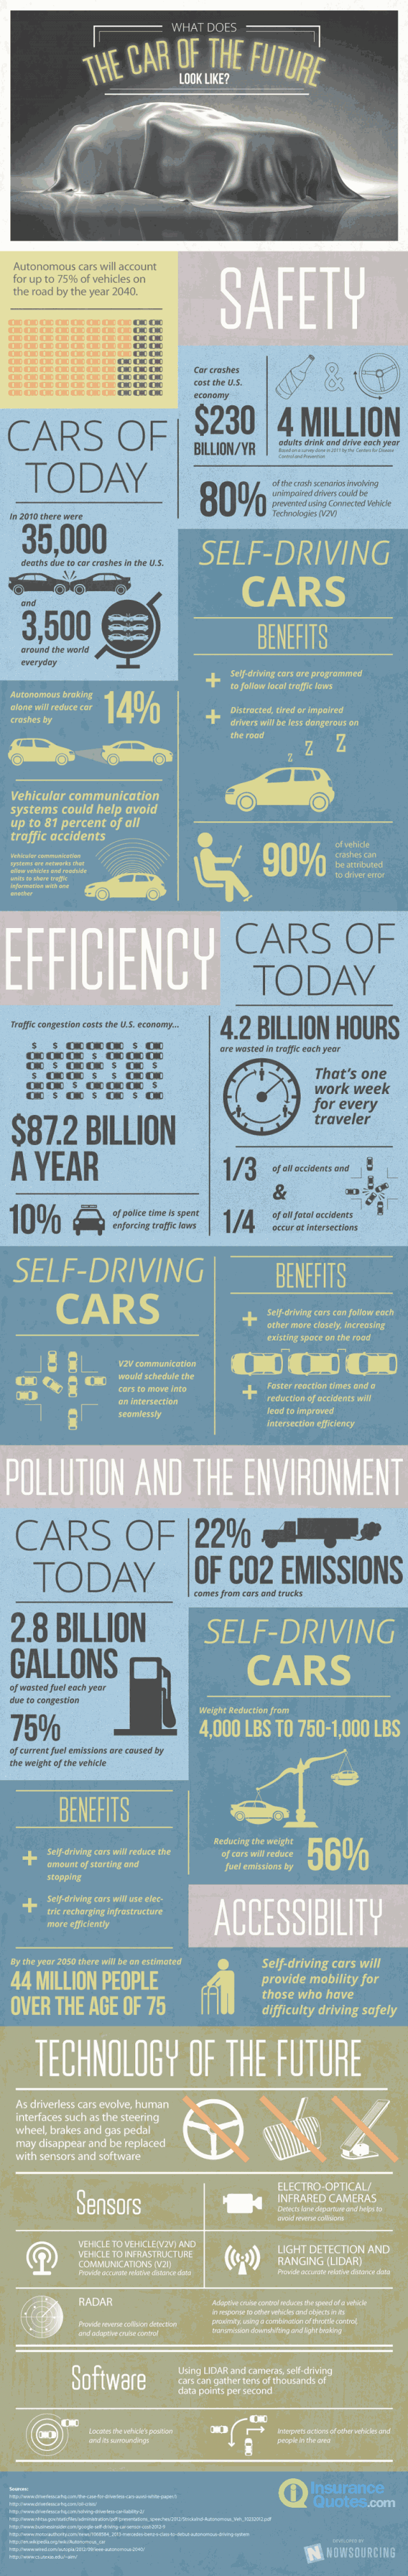 self-driving-cars-infographic-800-640x4036 (1)